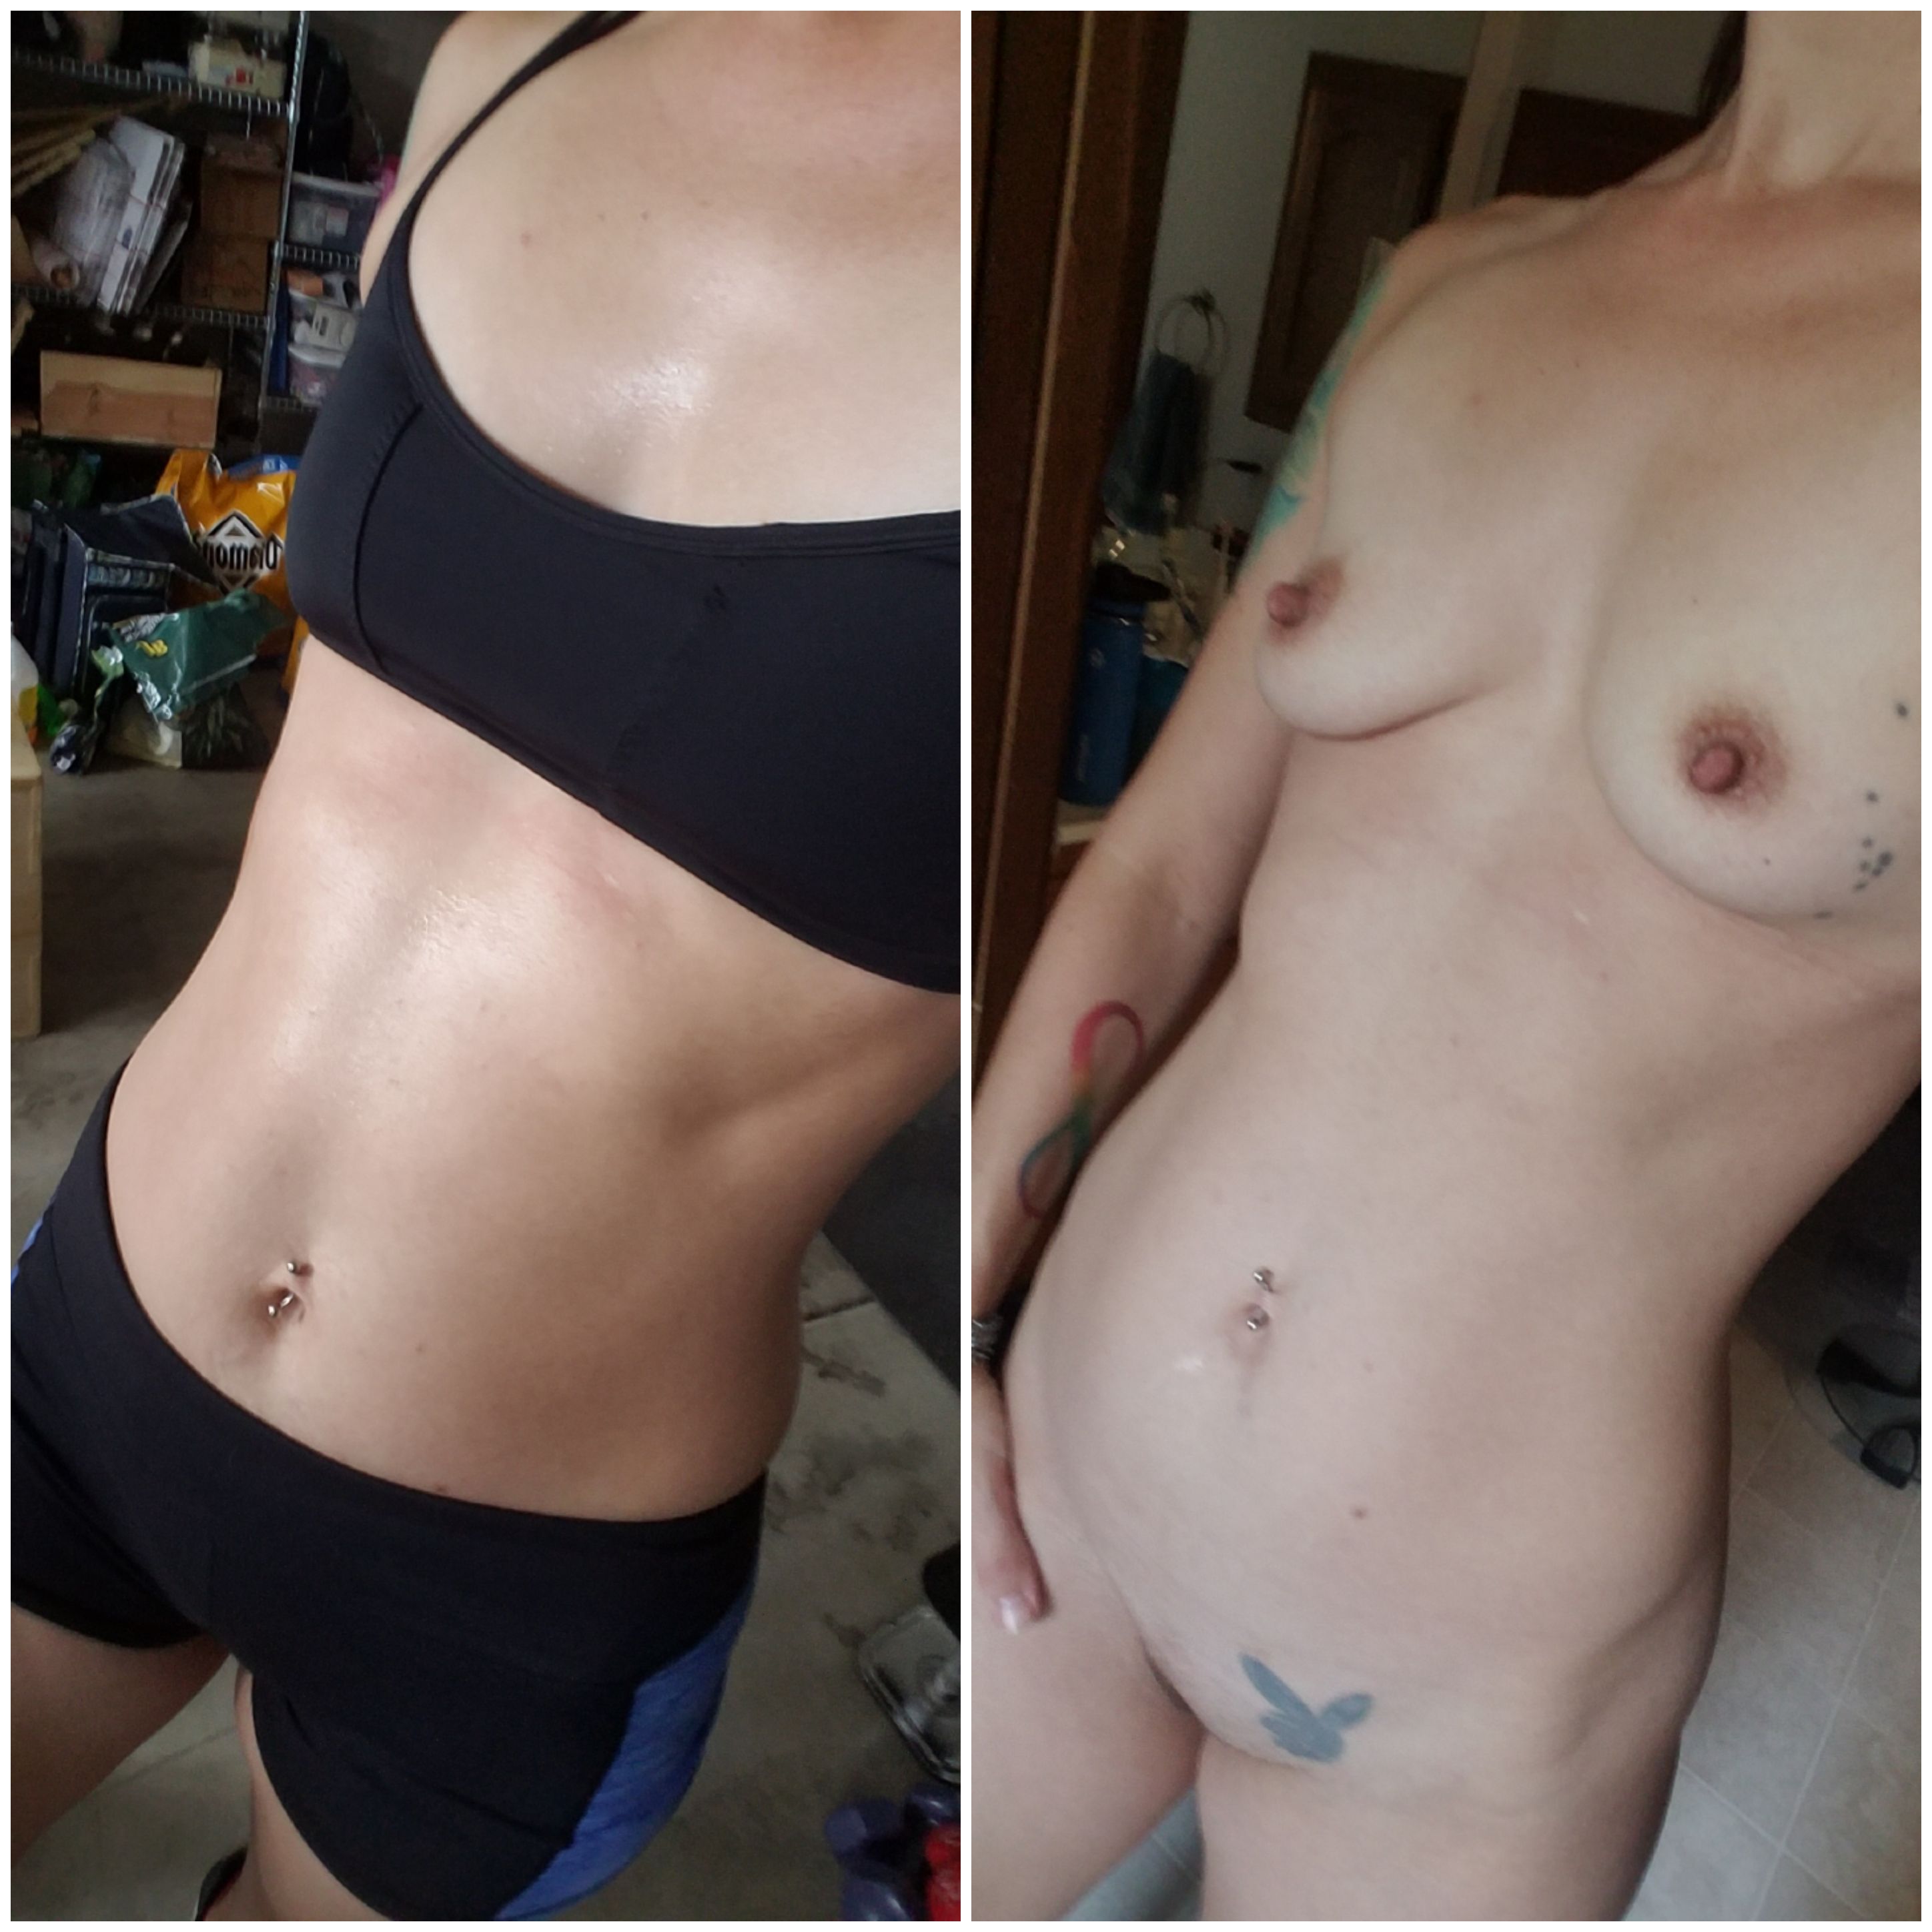 Post Workout On/of – I’ll Always Eat Too Many Snacks To Have A 6 Pack But I’m Pretty Happy With Where I’m At.